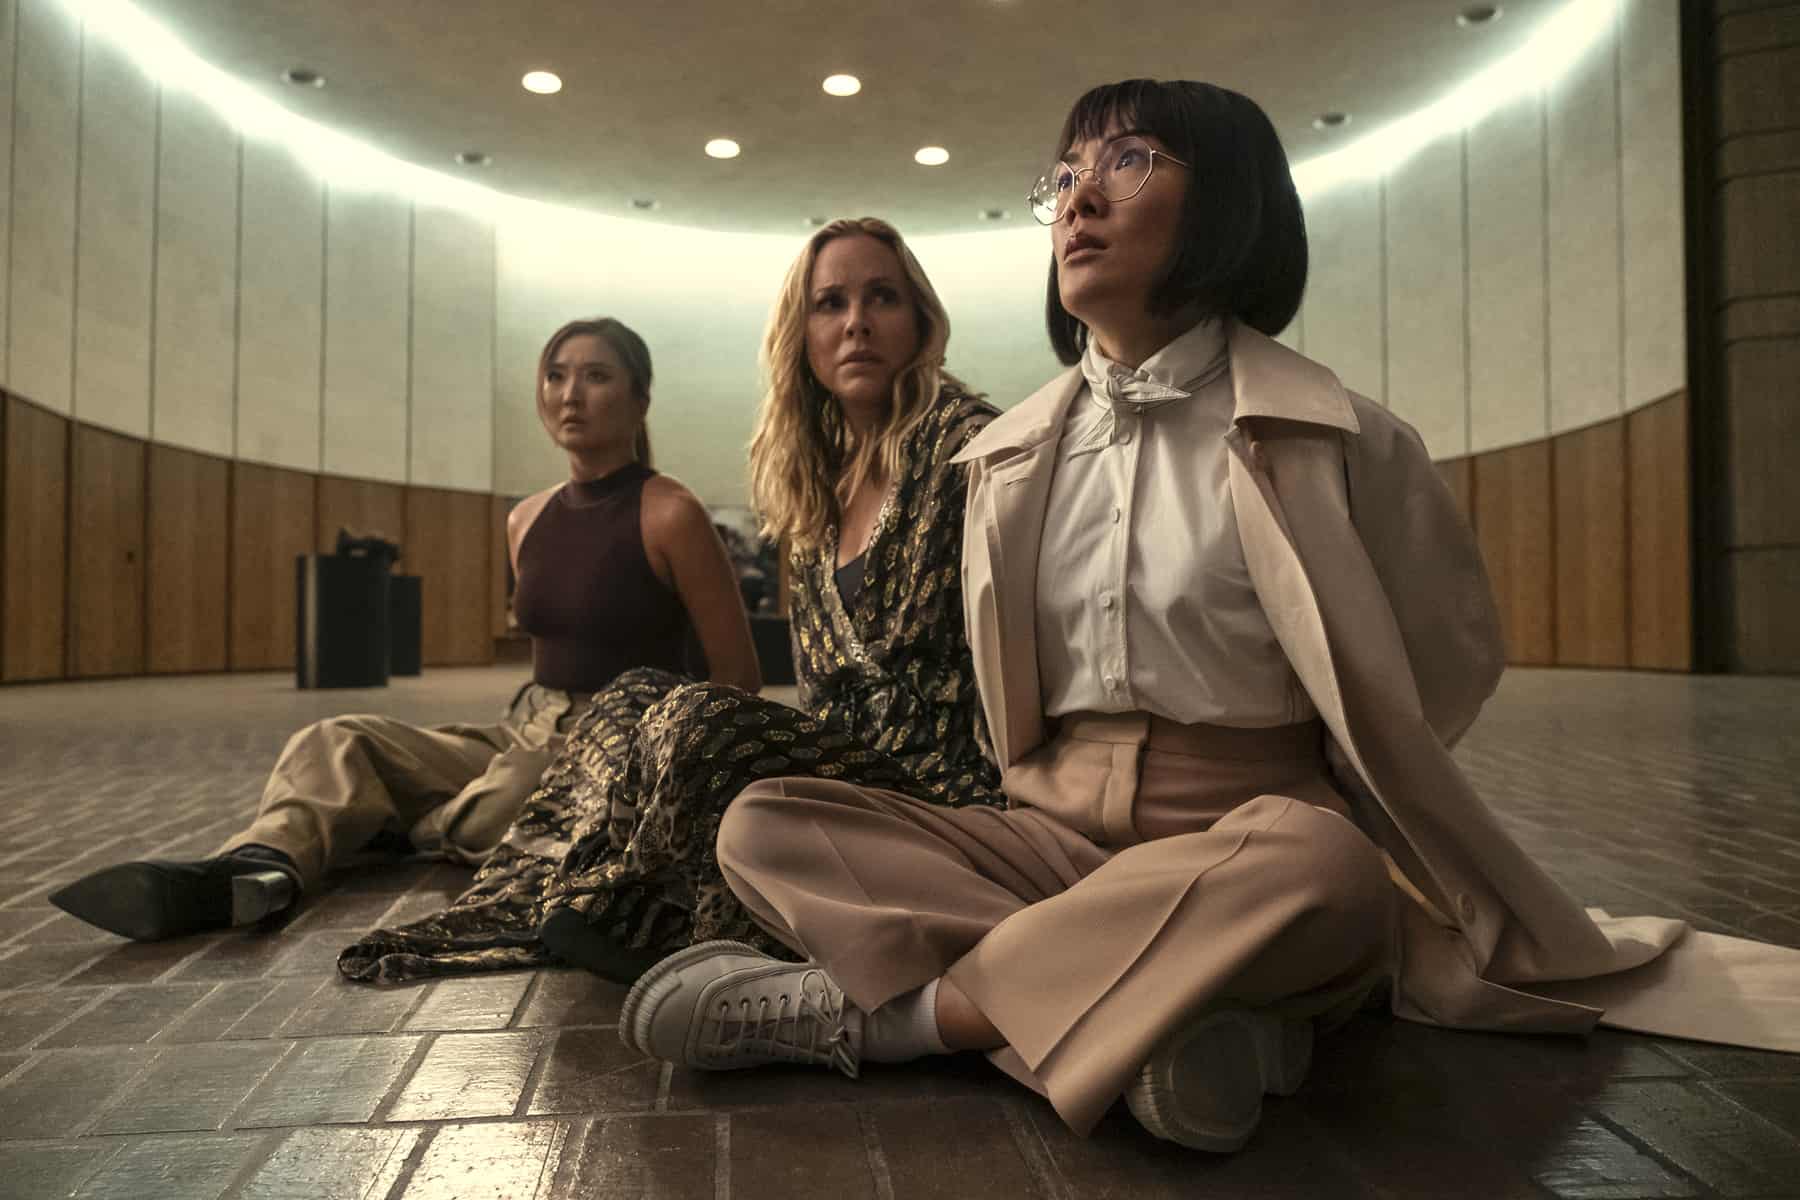 Three women are seated on the floor with hands bound in this image from A24.